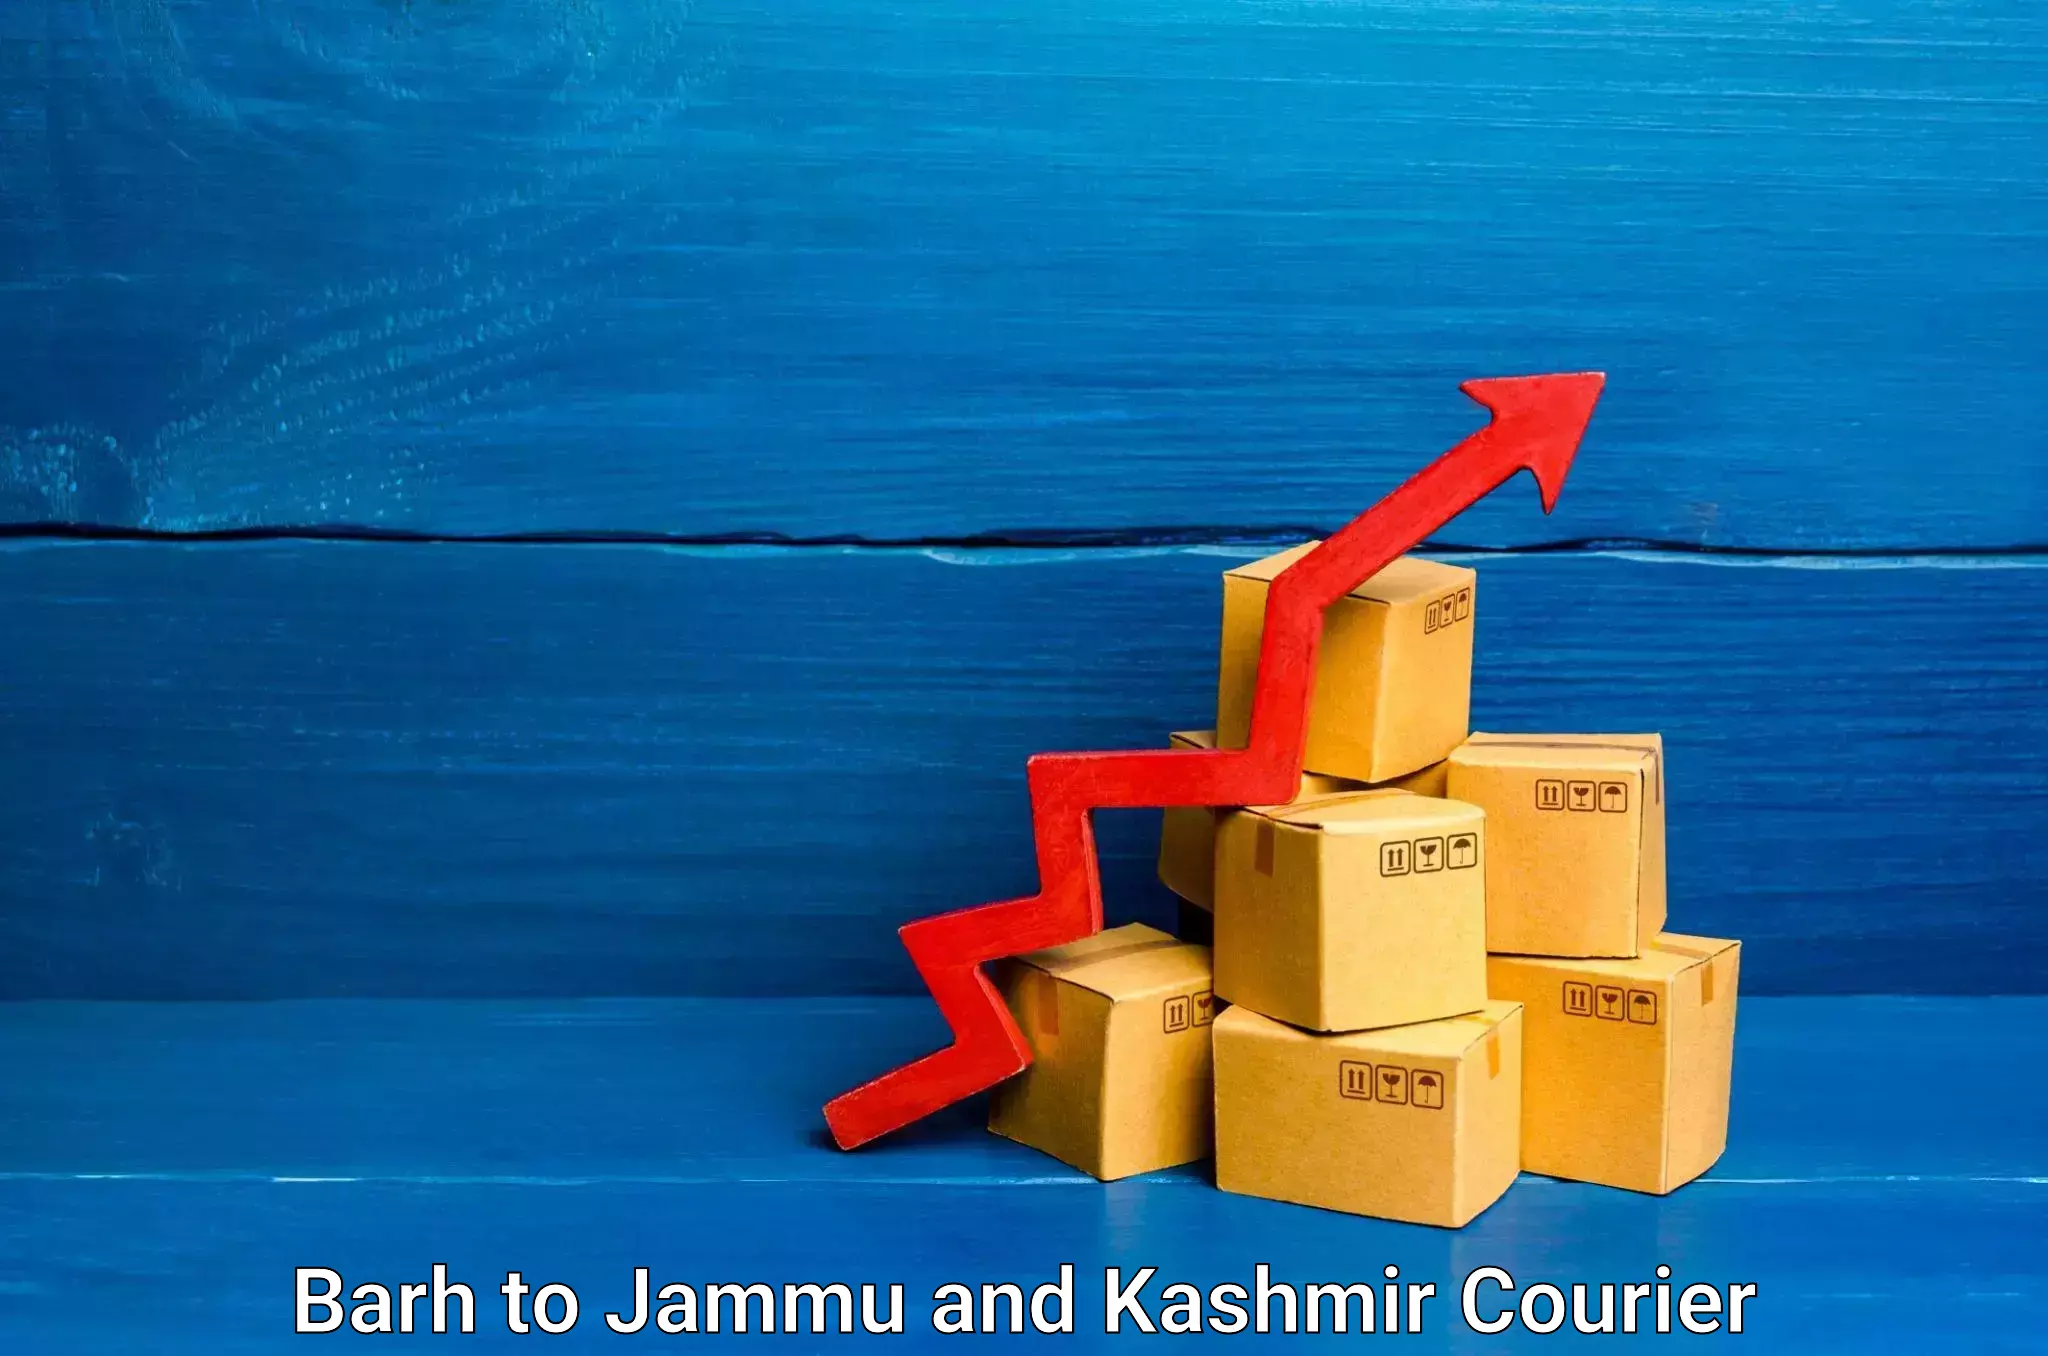 Furniture moving experts Barh to Jammu and Kashmir